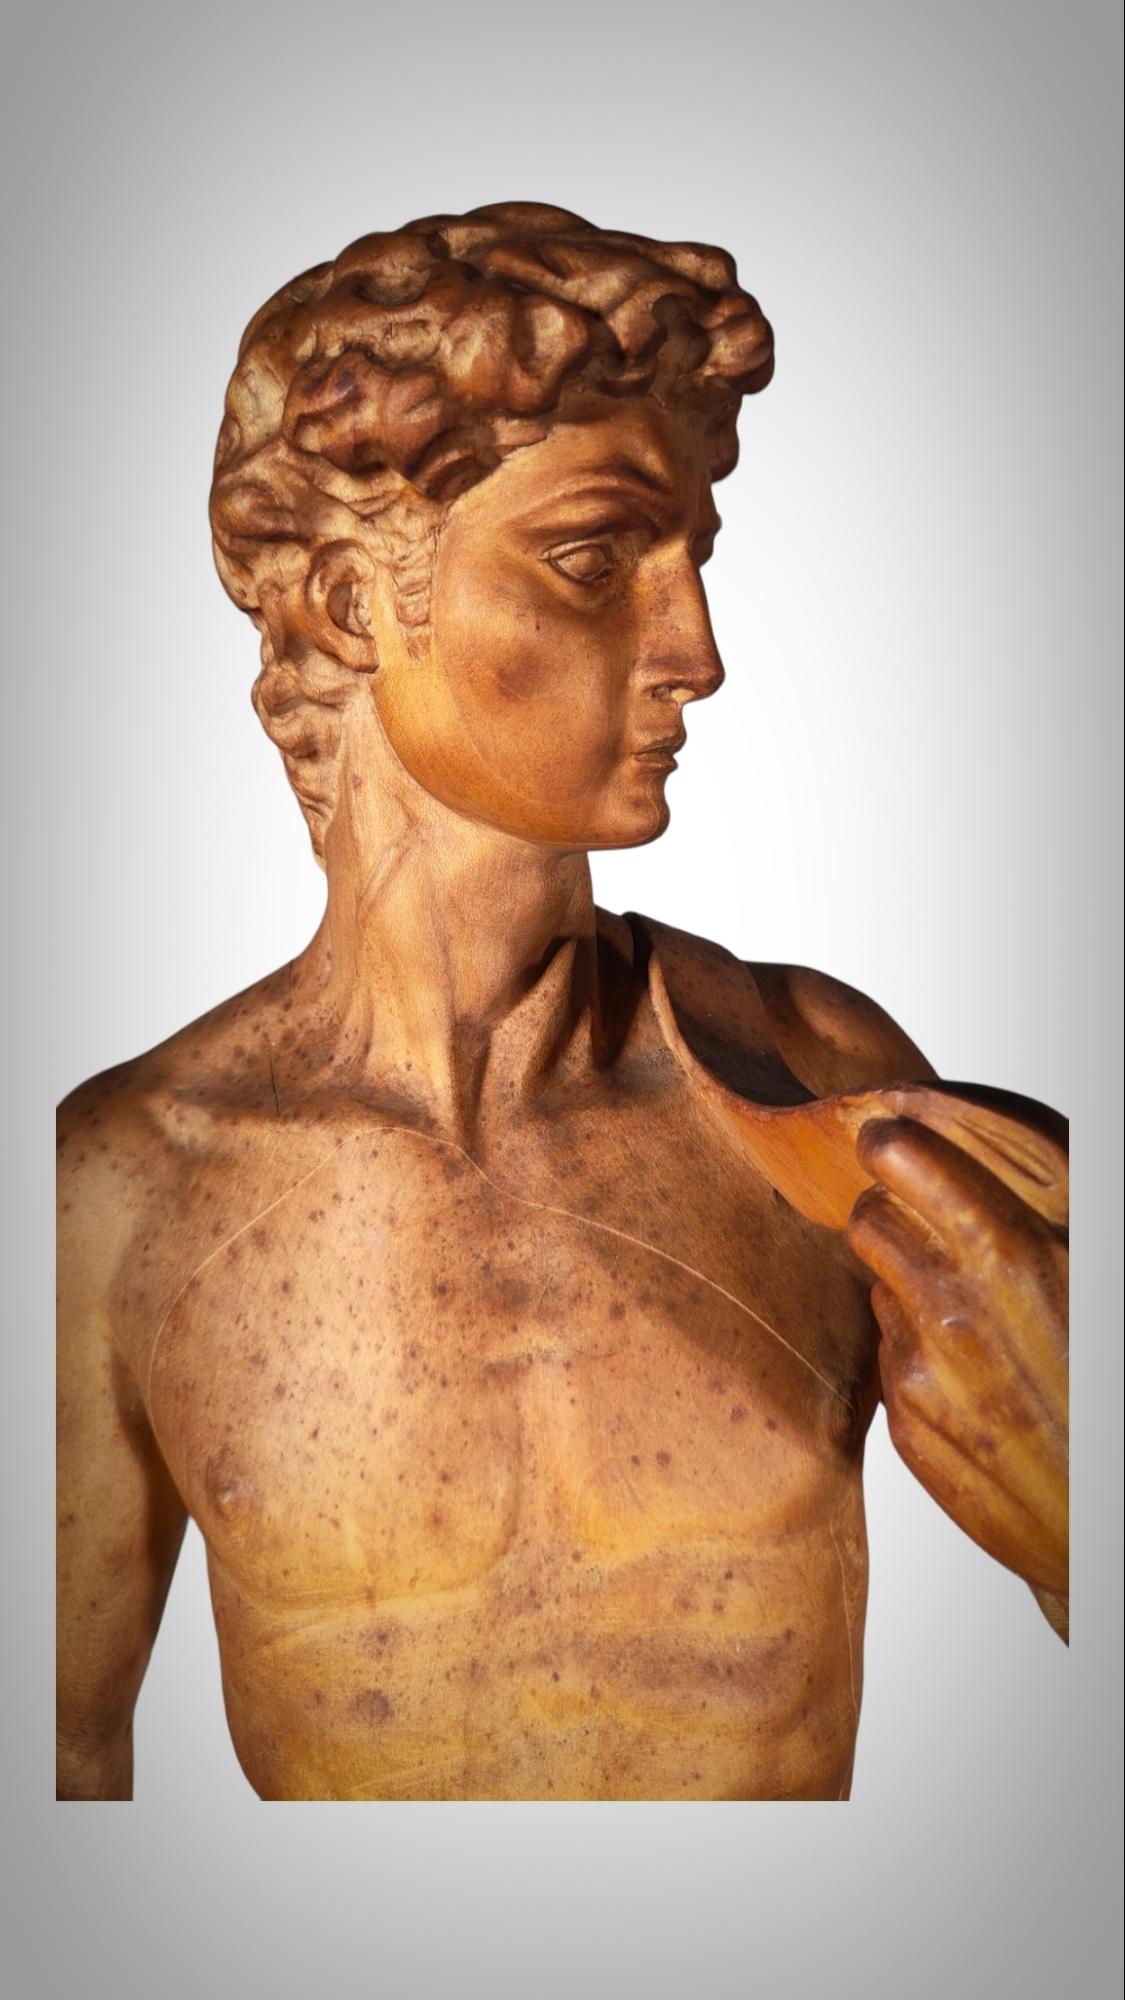 DAVID SCULPTURE IN WOOd
OLD SOLID WOOD HANDMADE SCULPTURE AT THE BEGINNING OF 1900, POSSIBLY ITALIAN SCHOOL. IT HAS A NICE PATINA AND IS IN VERY GOOD CONDITION. VERY DECORATIVE. MEASURES: 82X28X20 CM